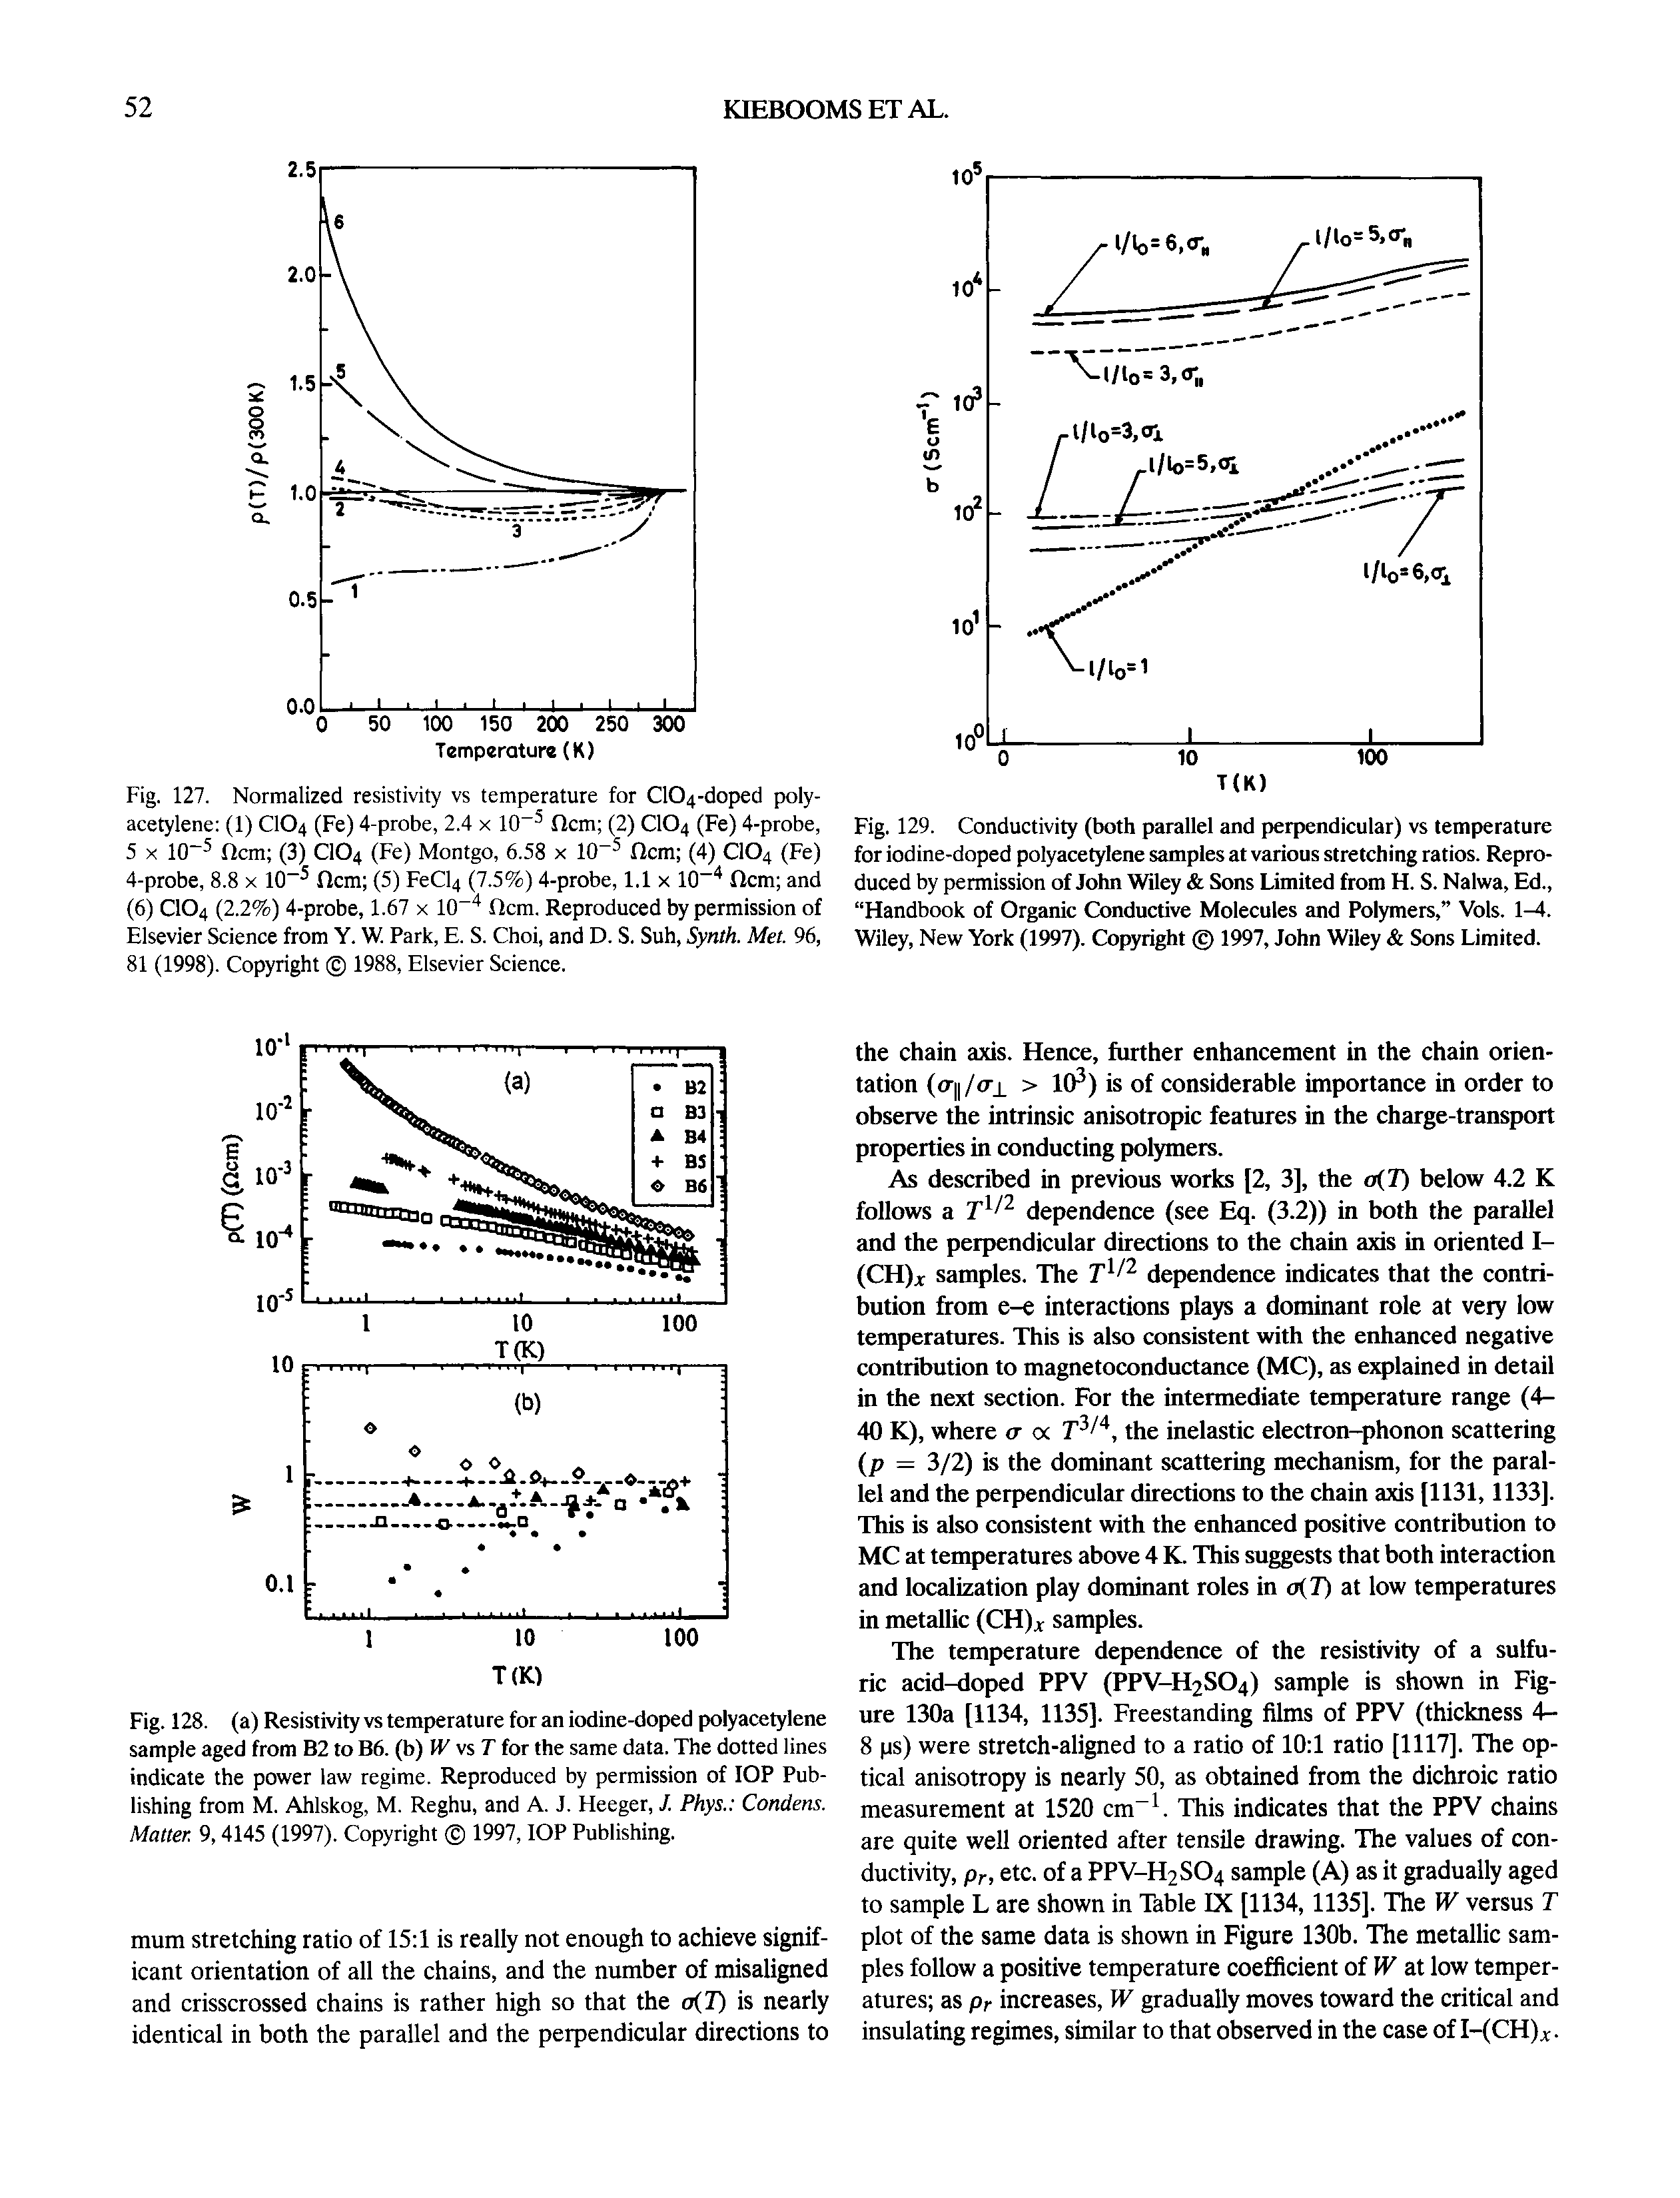 Fig. 129. Conductivity (both parallel and perpendicular) vs temperature for iodine-doped polyacetylene samples at various stretching ratios. Reproduced by permission of John Wiley Sons Limited from H. S. Nalwa, Ed., Handbook of Organic Conductive Molecules and Polymers, Vols. 1-4. Wiley, New York (1997). Copyright 1997, John Wiley Sons Limited.